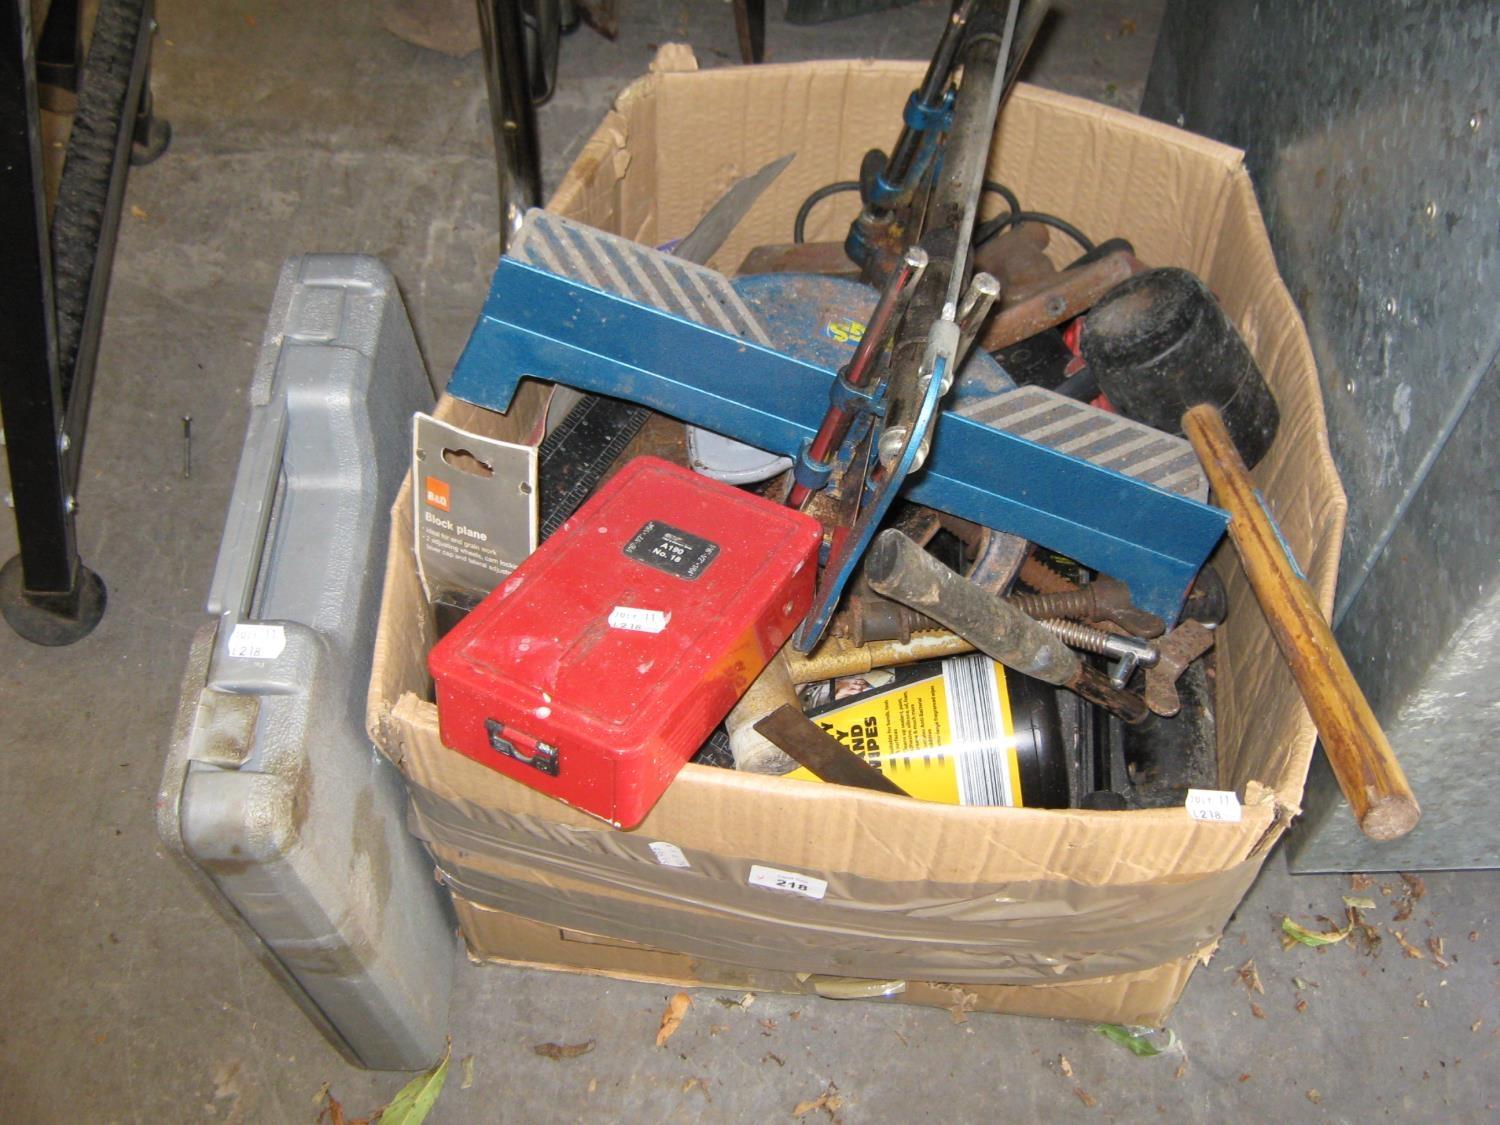 A QUANTITY OF MECHANIC?S TOOLS, SPANNERS, WOOD WORKING TOOLS AND SAWS AND GARDEN HAND TOOLS